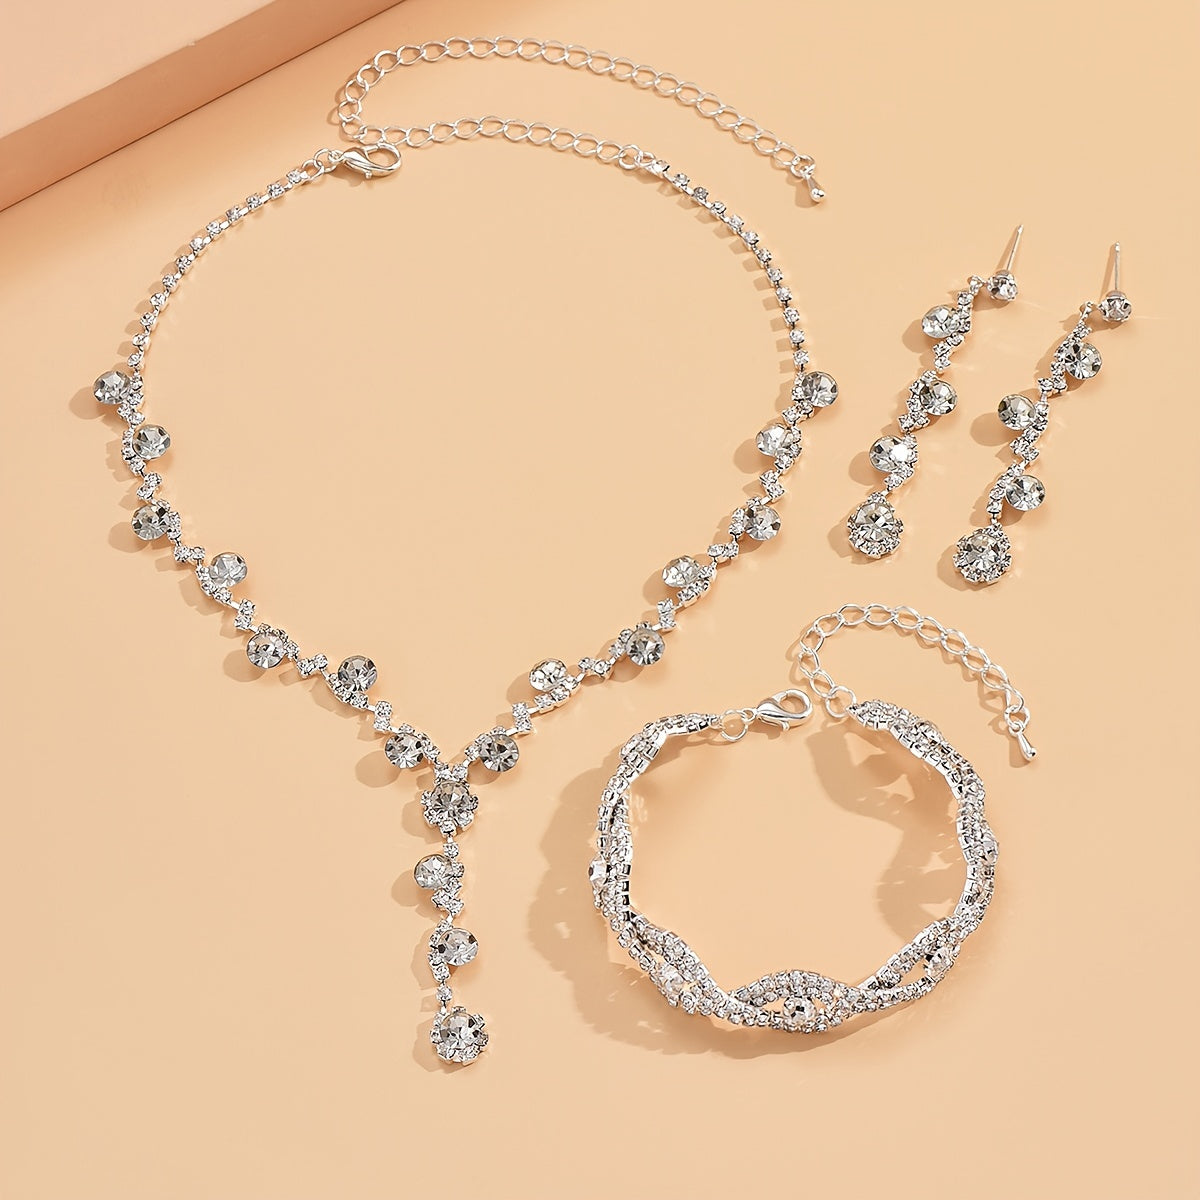 Shine Bright Like a Diamond with our Rhinestone Flower Jewelry Set - Perfect for Brides and Bridesmaids!